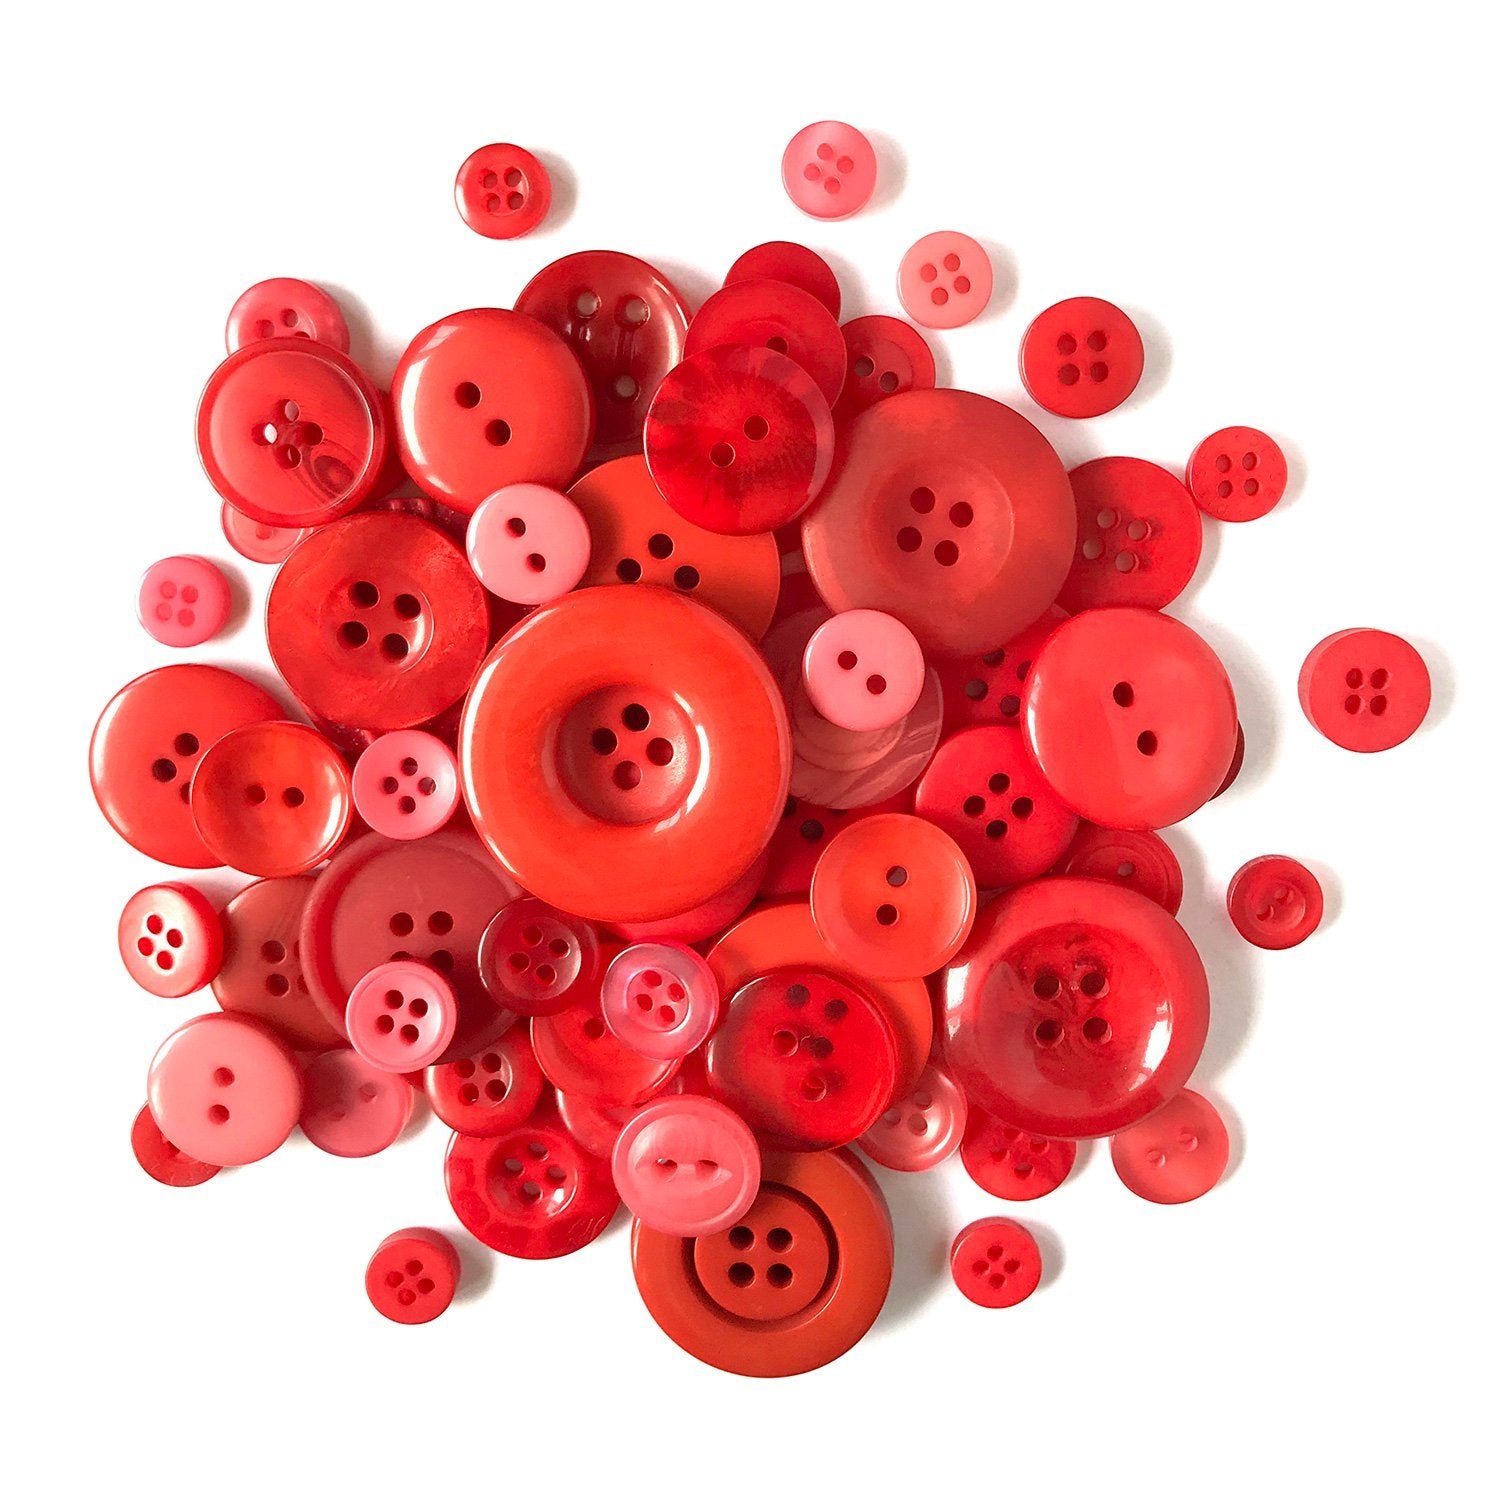 Red Buttons for Sewing, Craft and Quilts